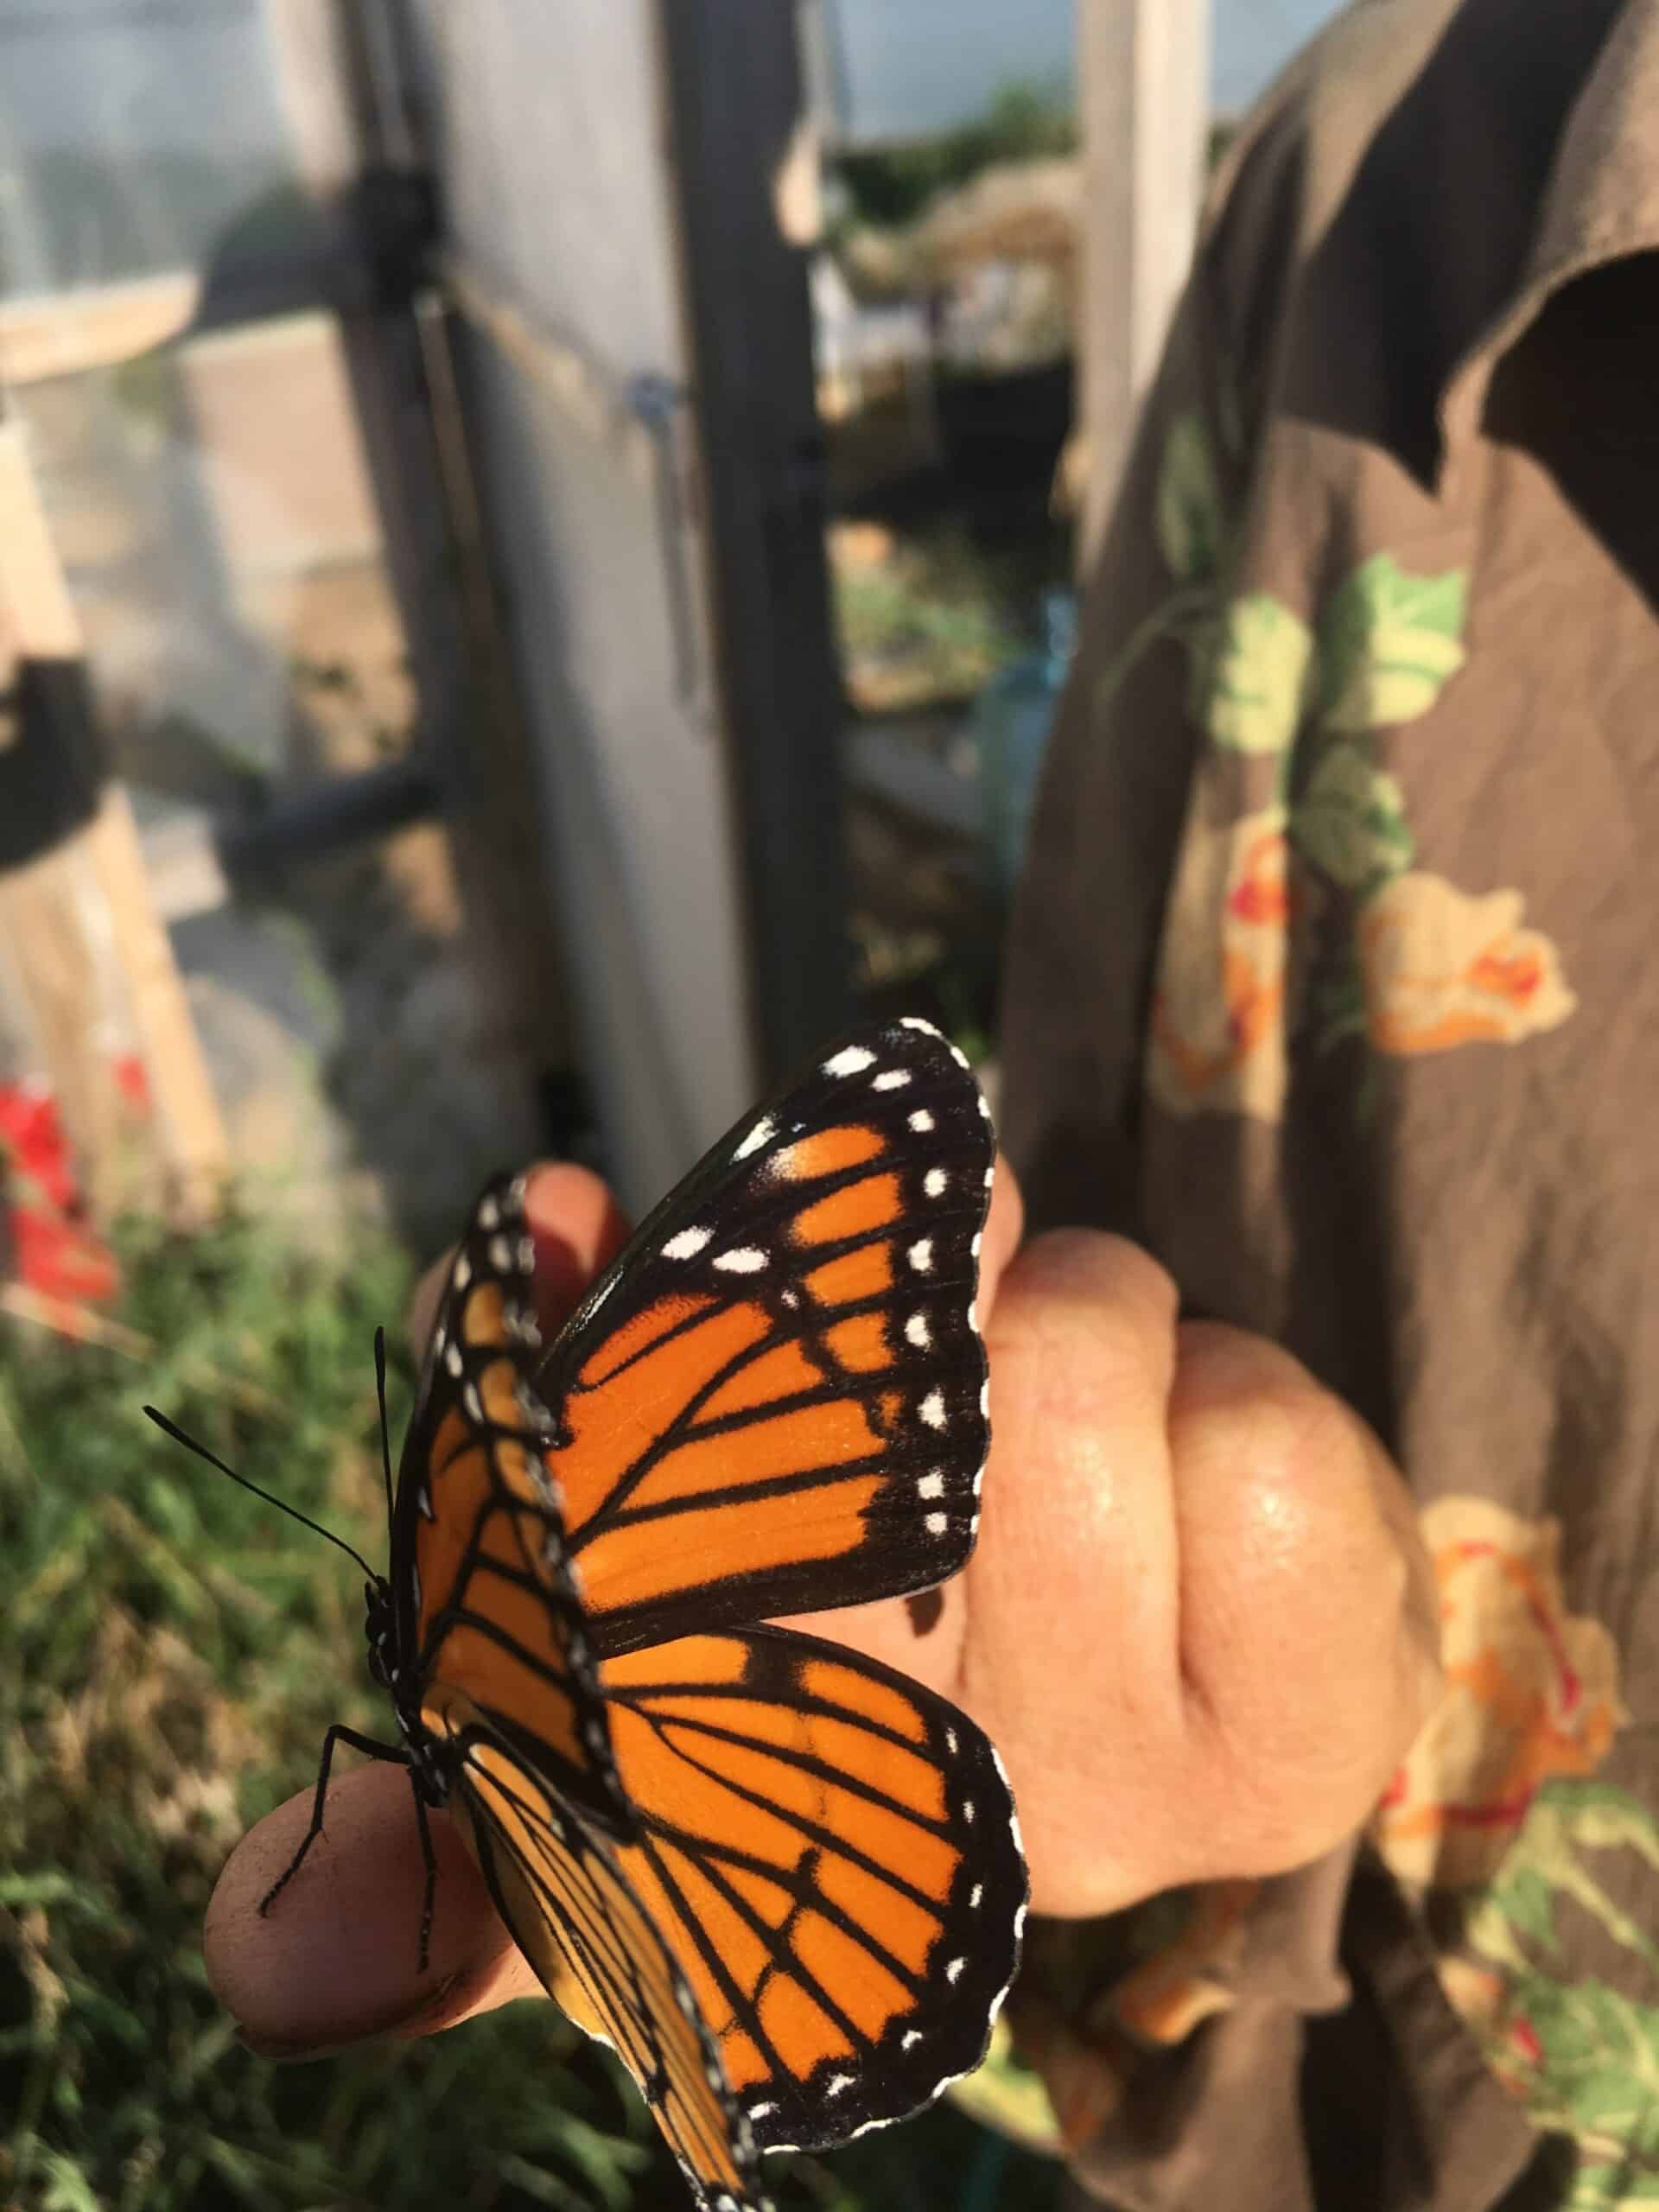 Monarch Butterfly 1 1 scaled - From February Dreaming to March Seeding